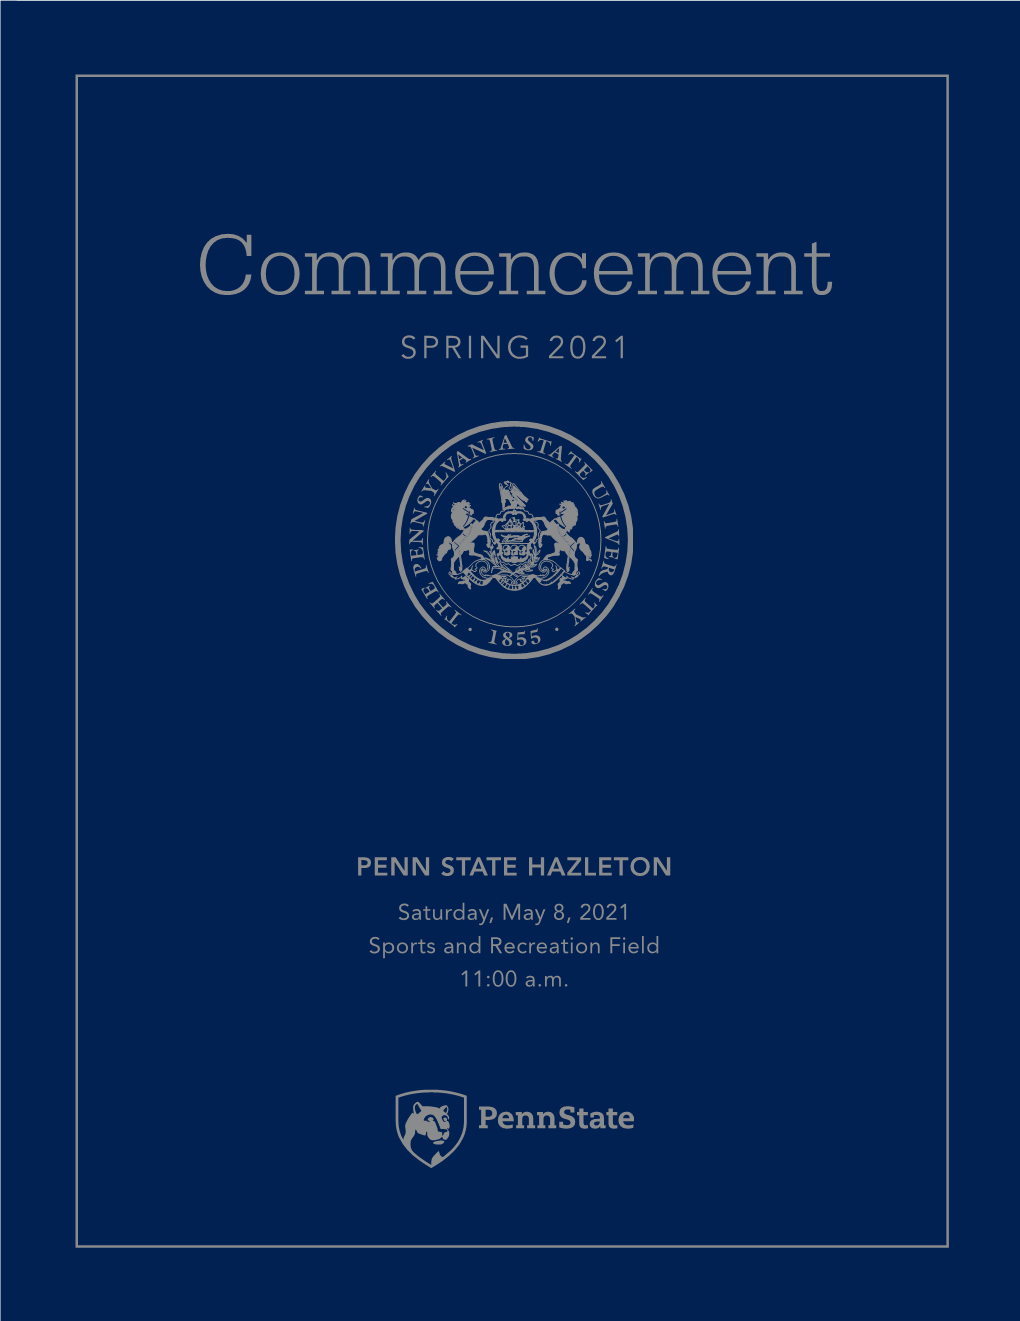 Commencement SPRING 2021